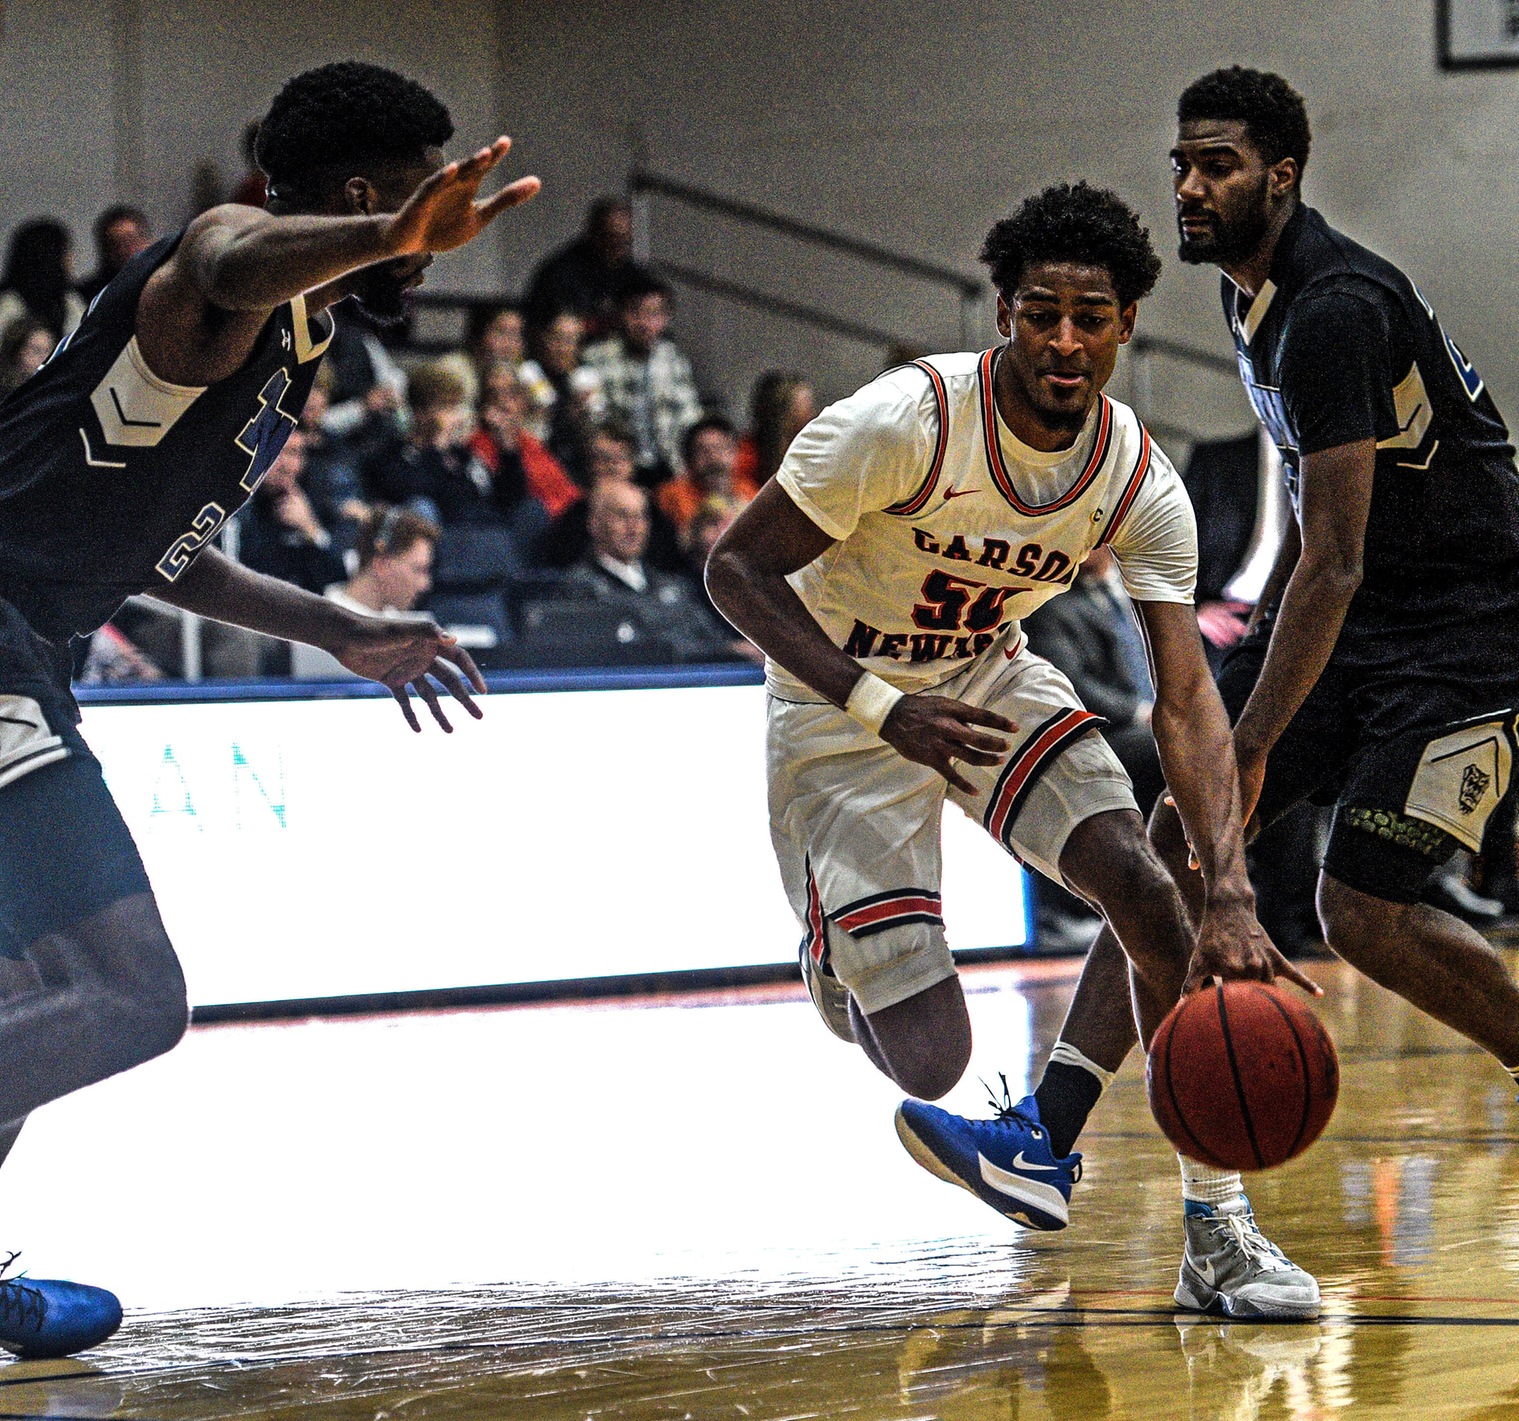 Turnovers trip up Eagles in 98-91 loss to Catawba